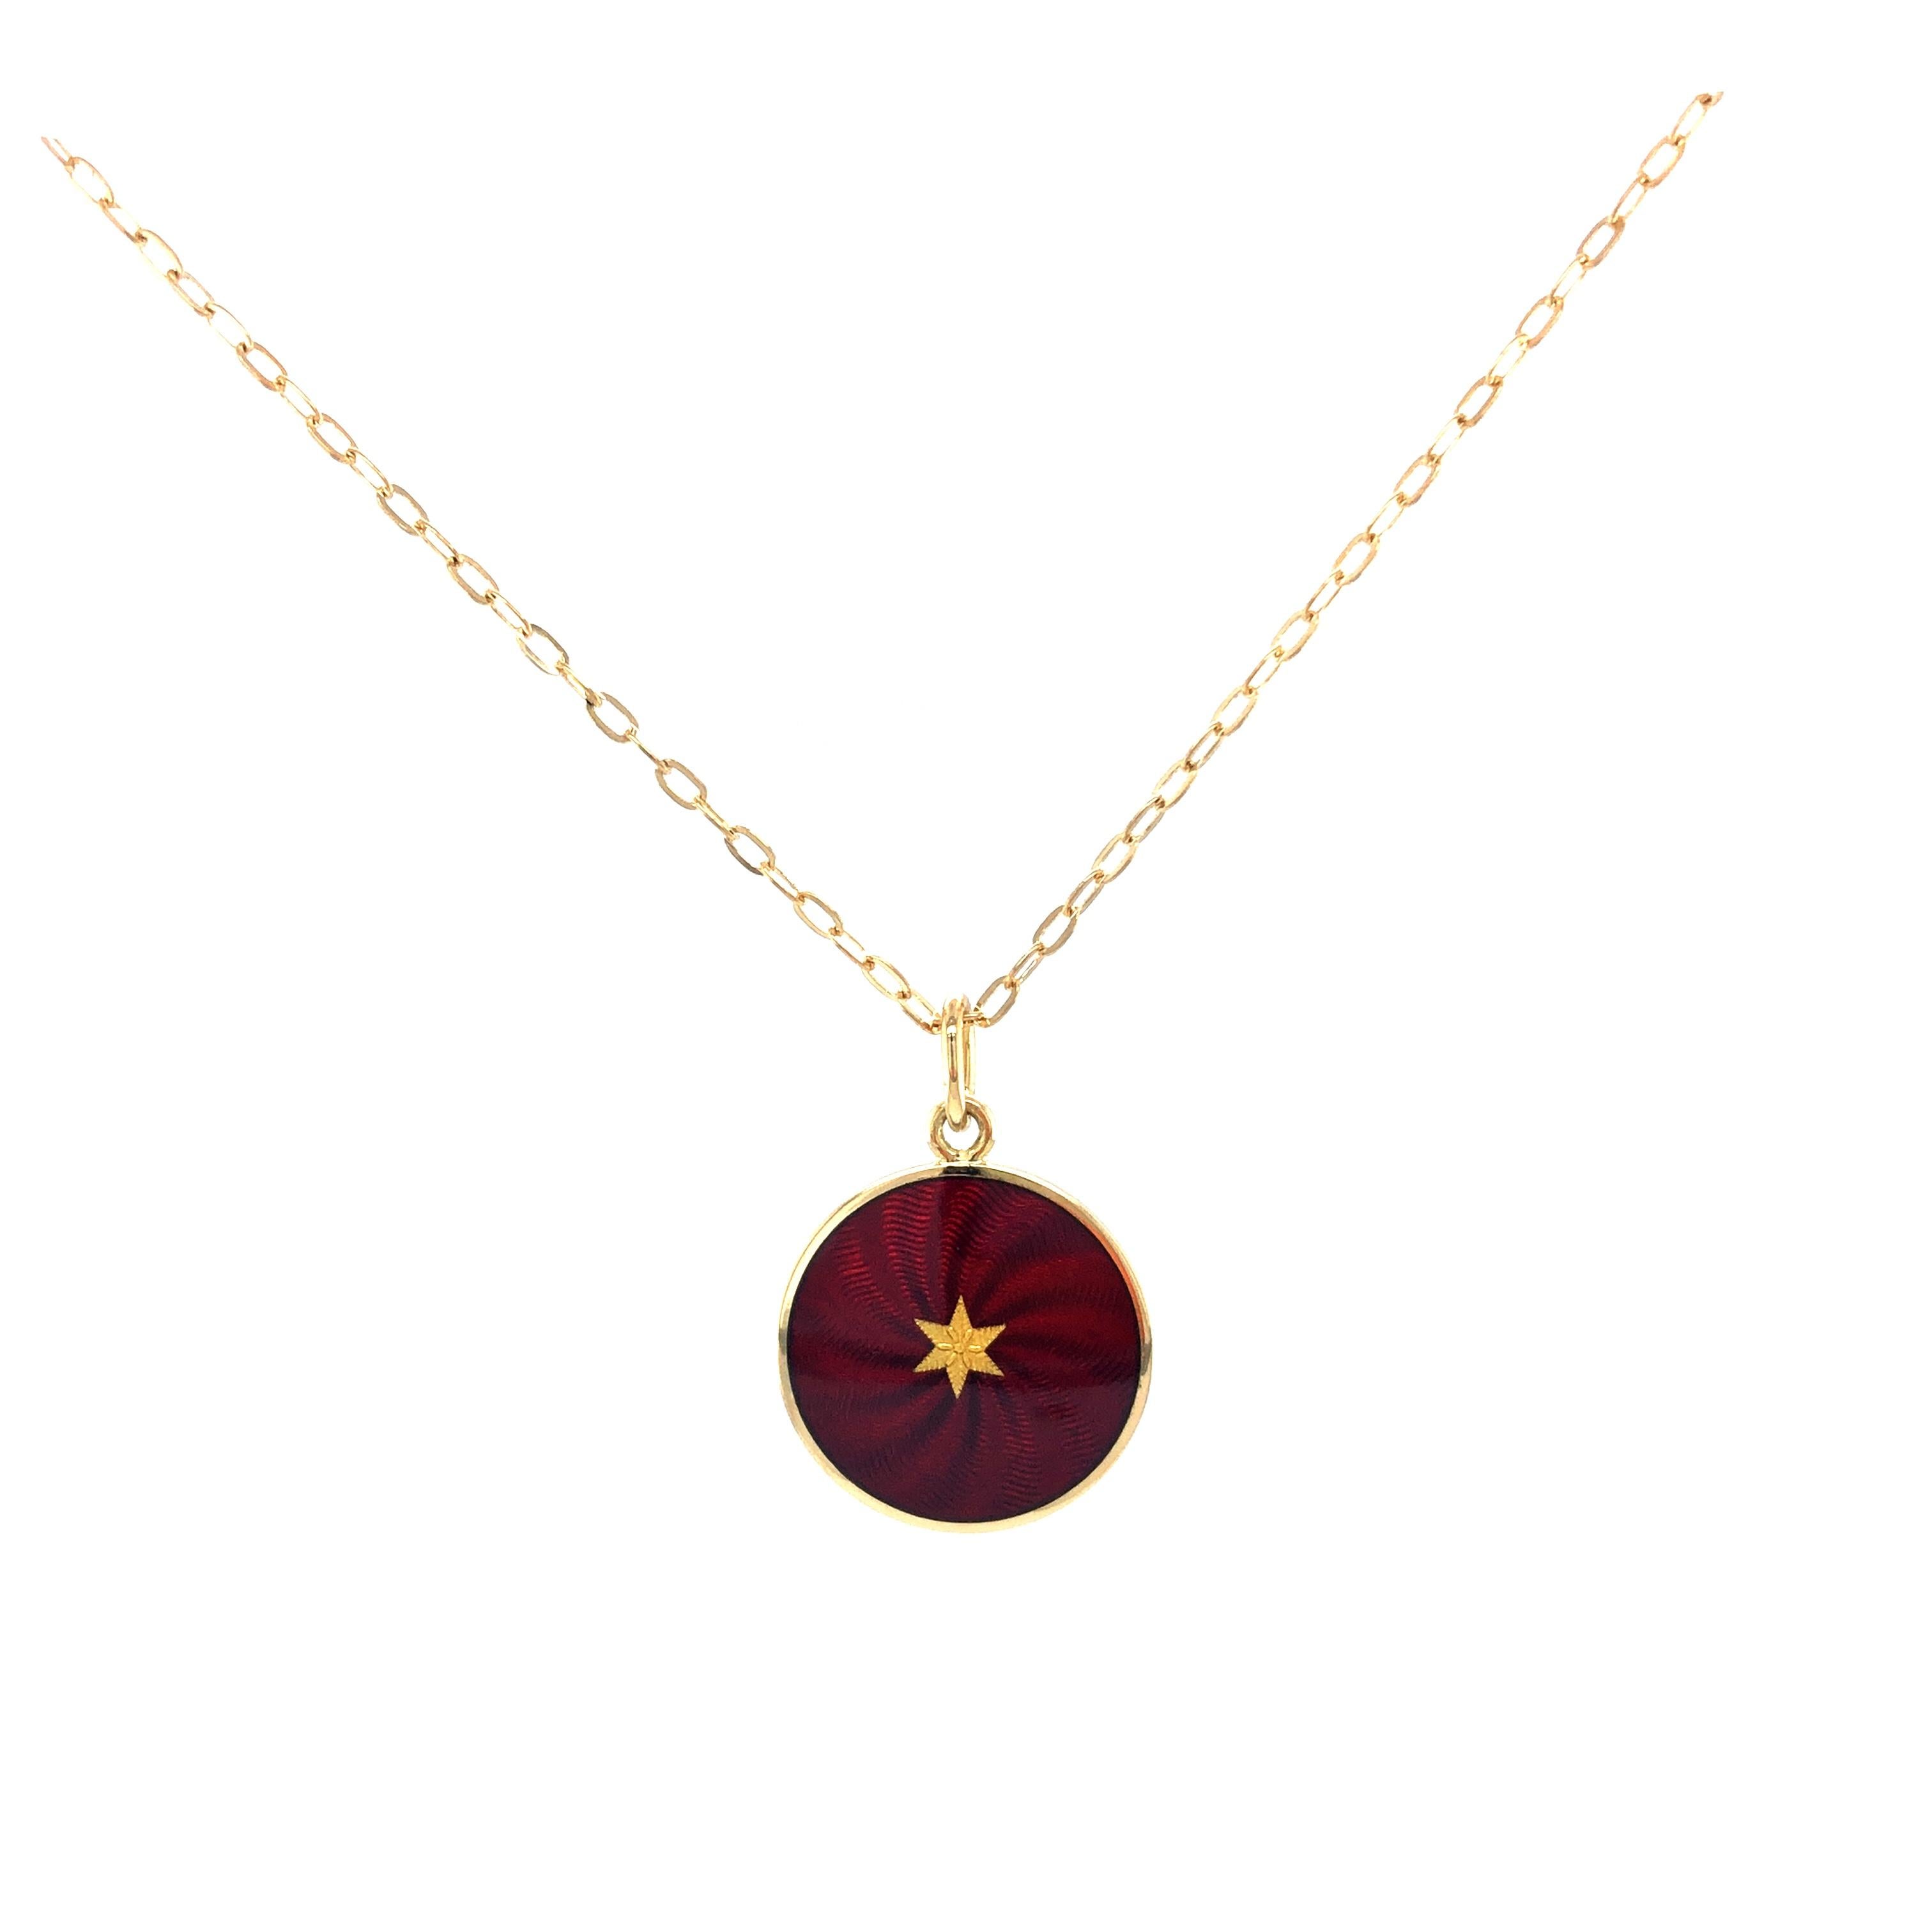 Victorian Round Disk Pendant, 18k Yellow Gold, Burgundy Red Guilloche Enamel Paillons For Sale